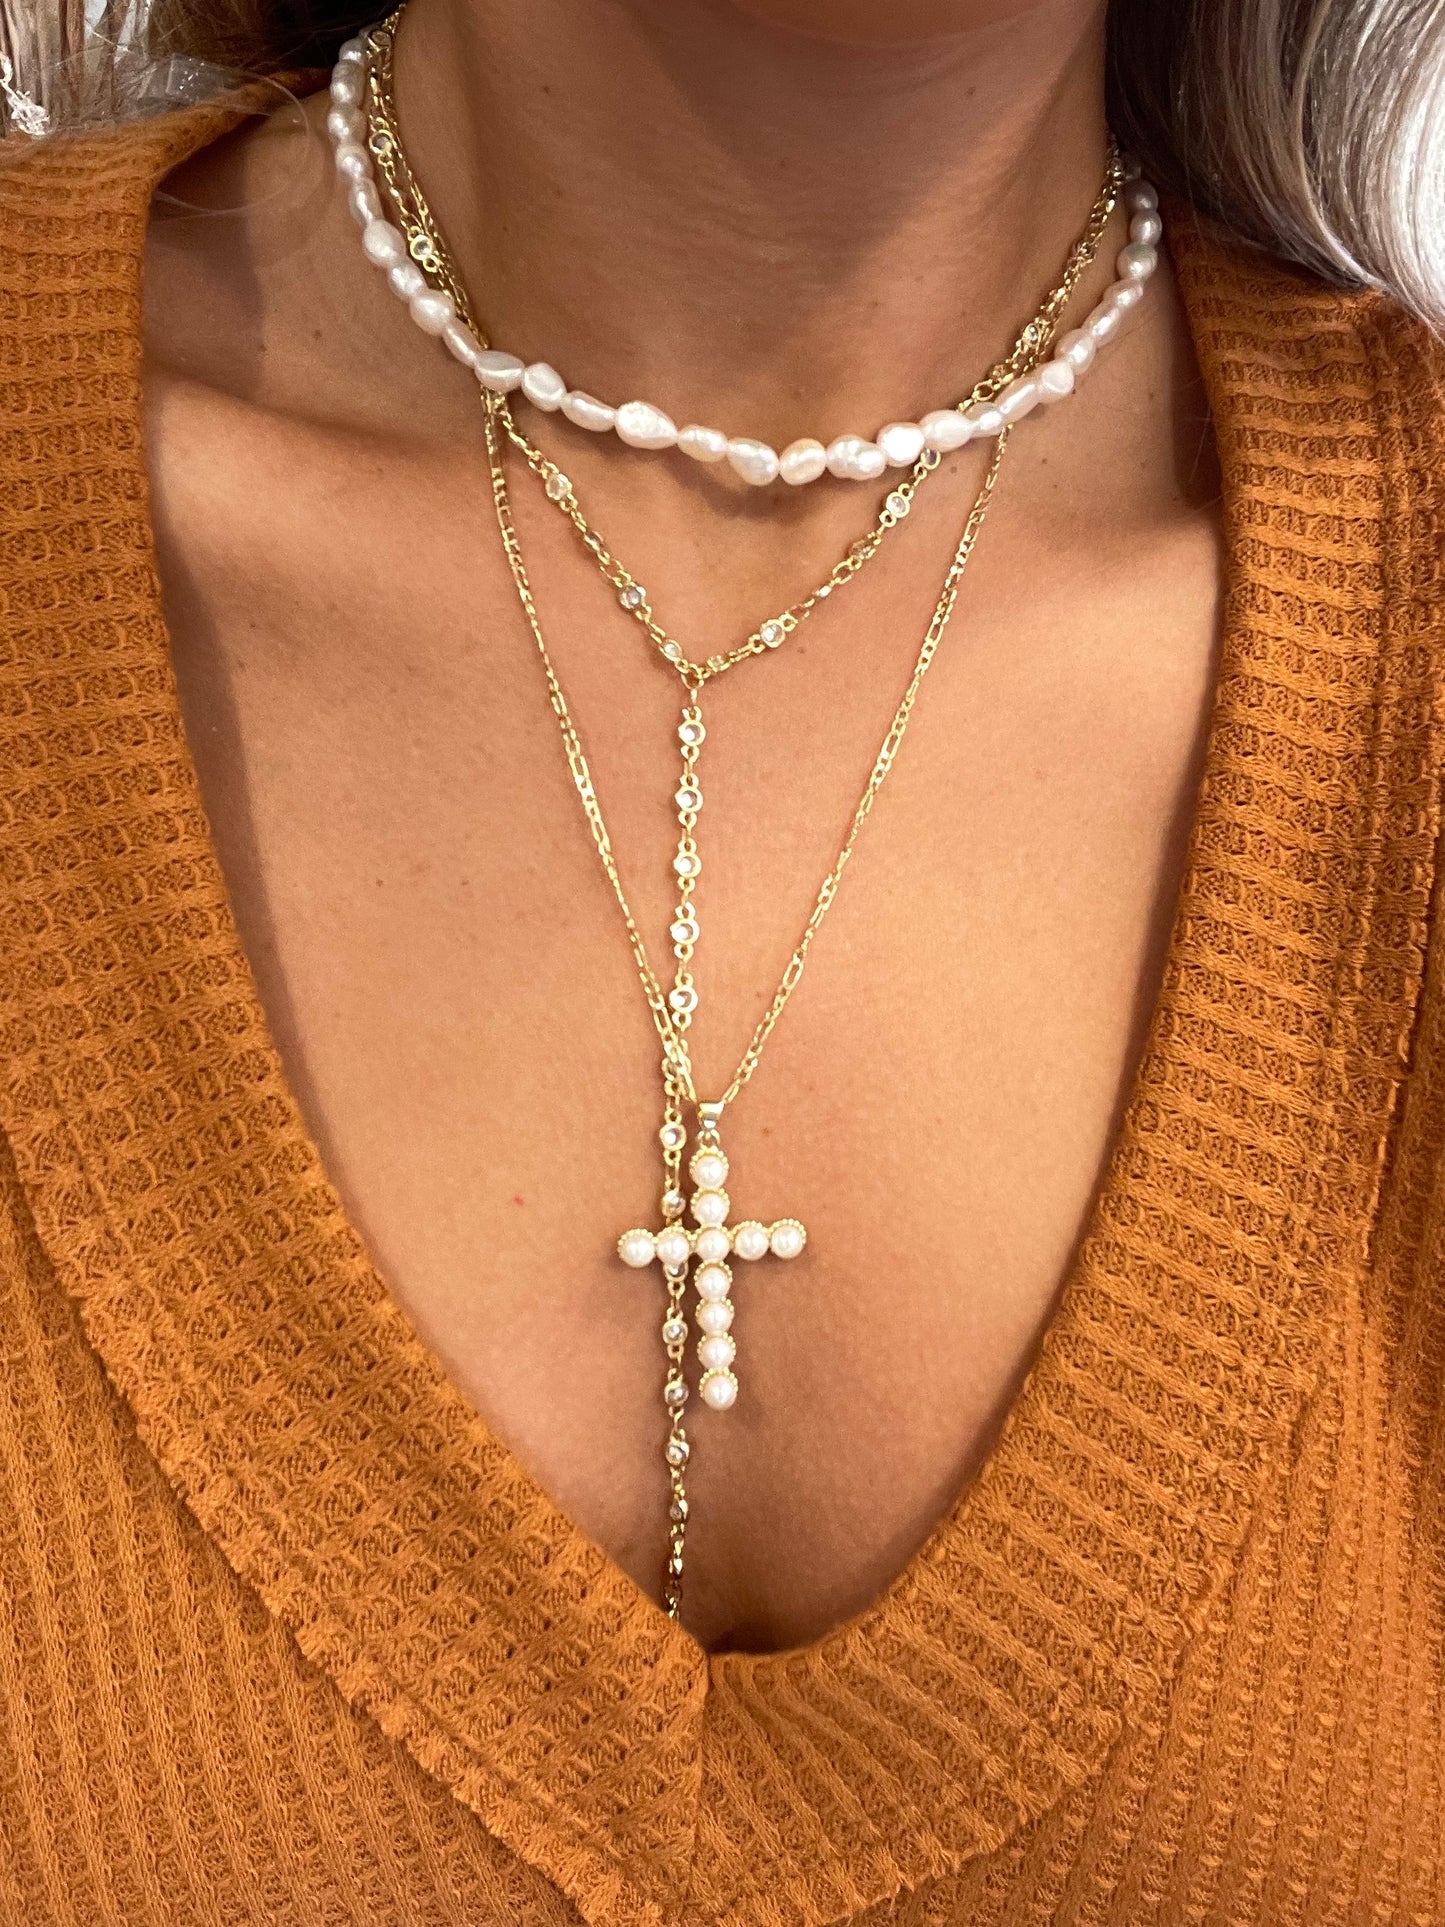 The Ocean Necklace